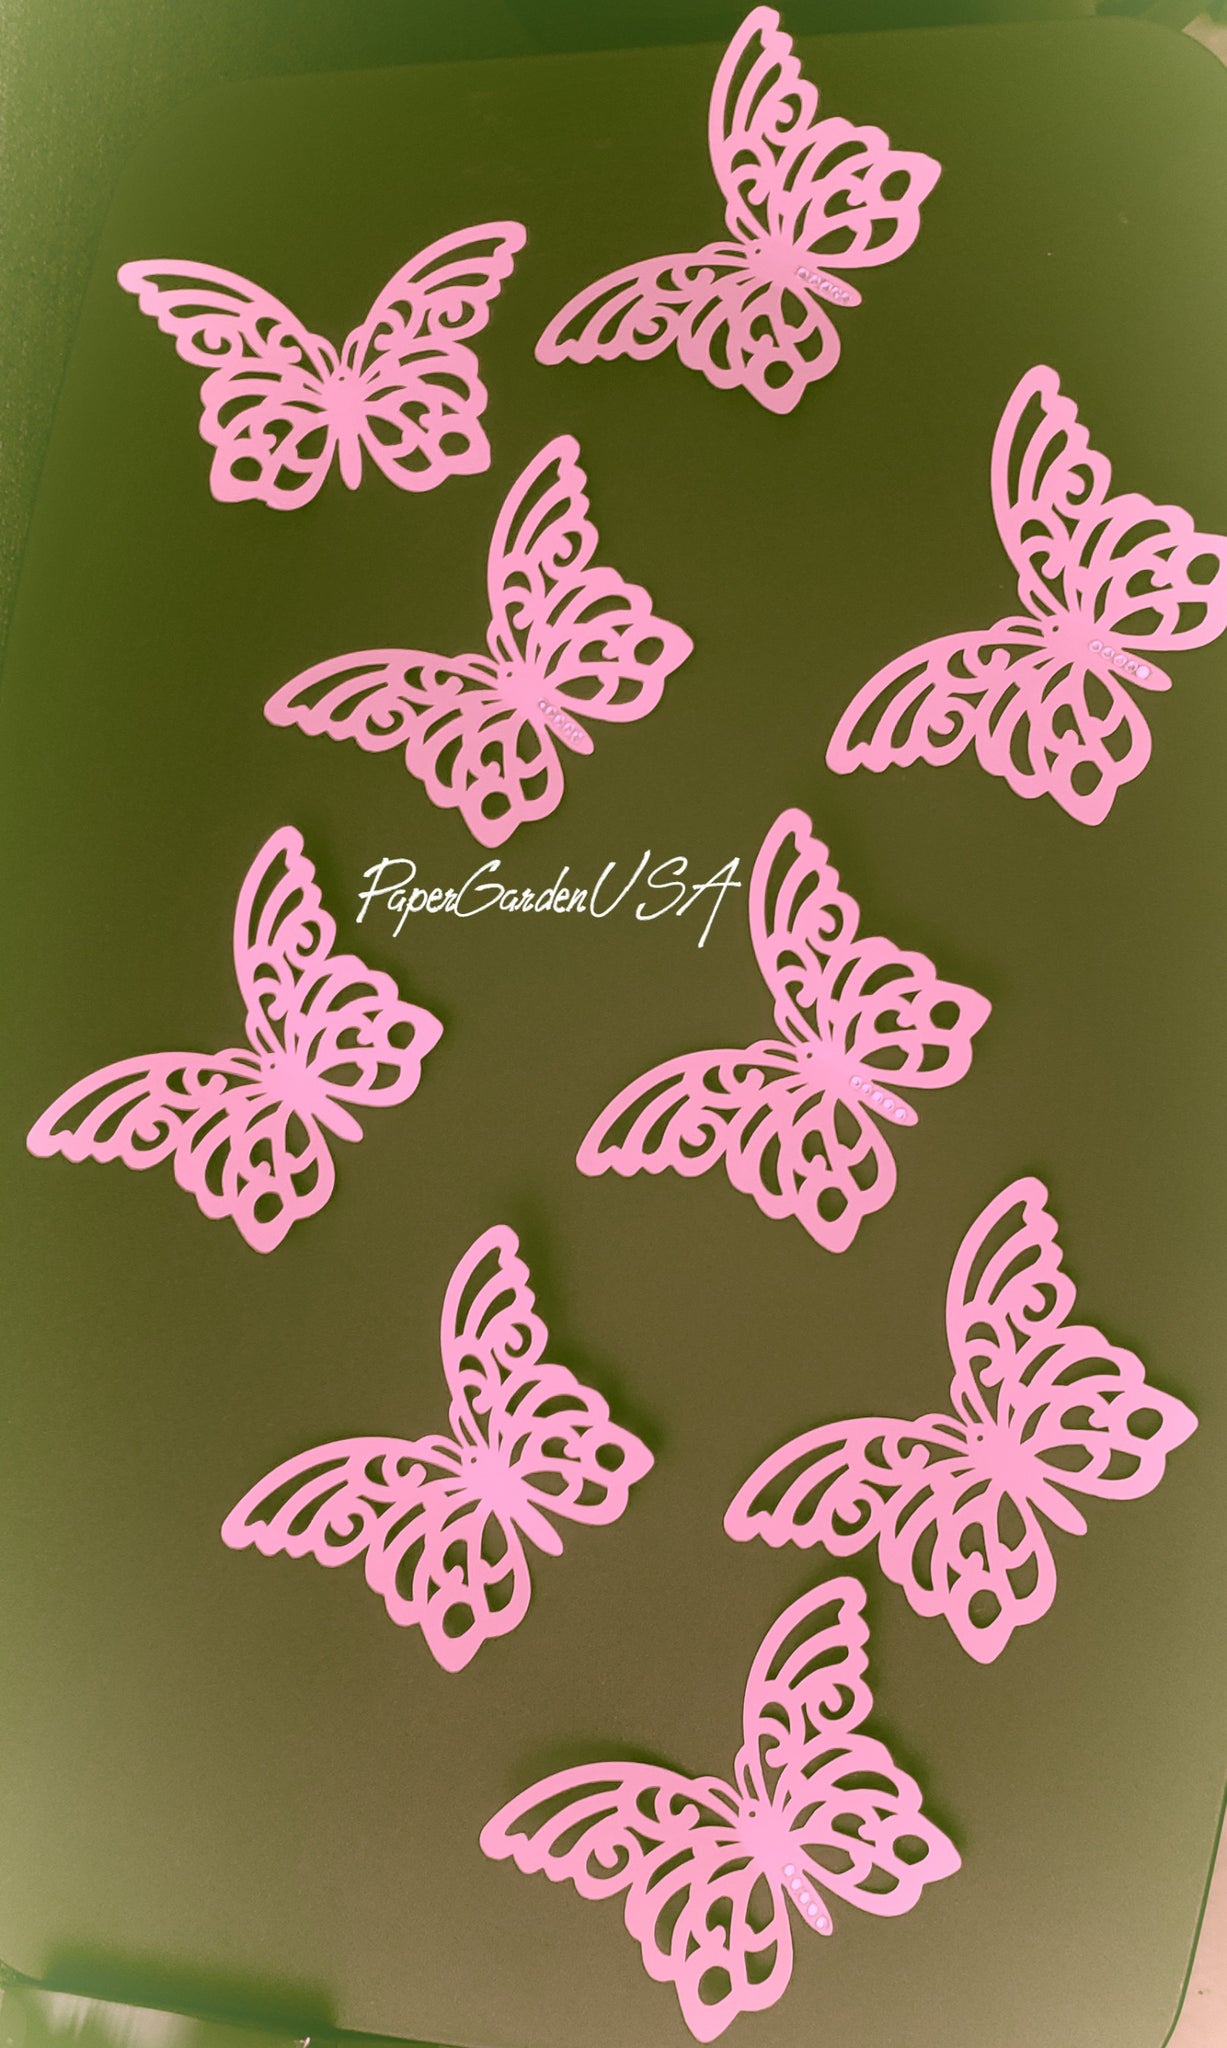 Download 3d Mandala Butterfly Decals Free Fast Shipping Nursery Decor Photo